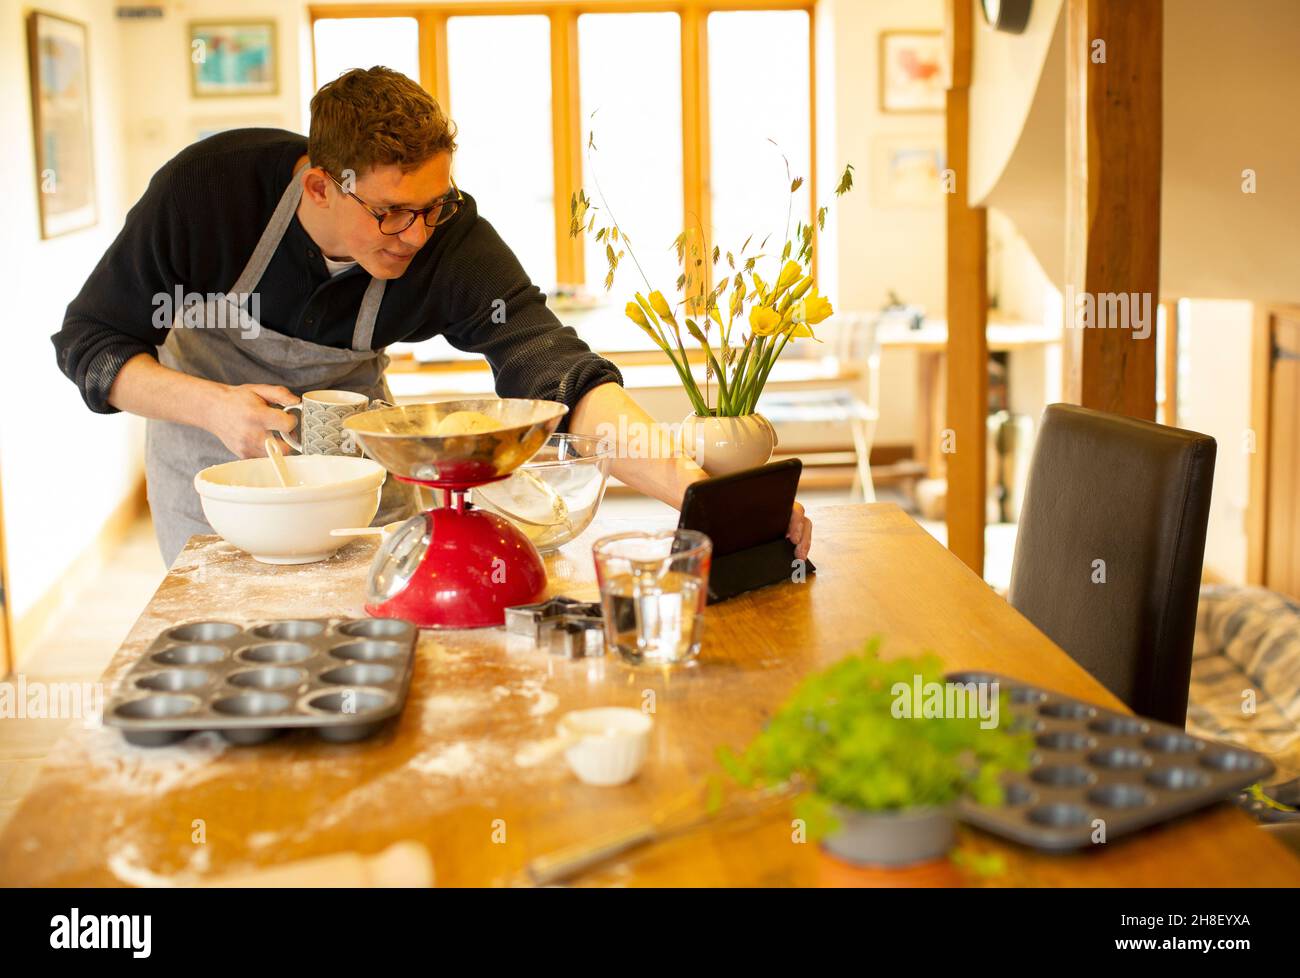 Man video chatting and baking in messy kitchen Stock Photo